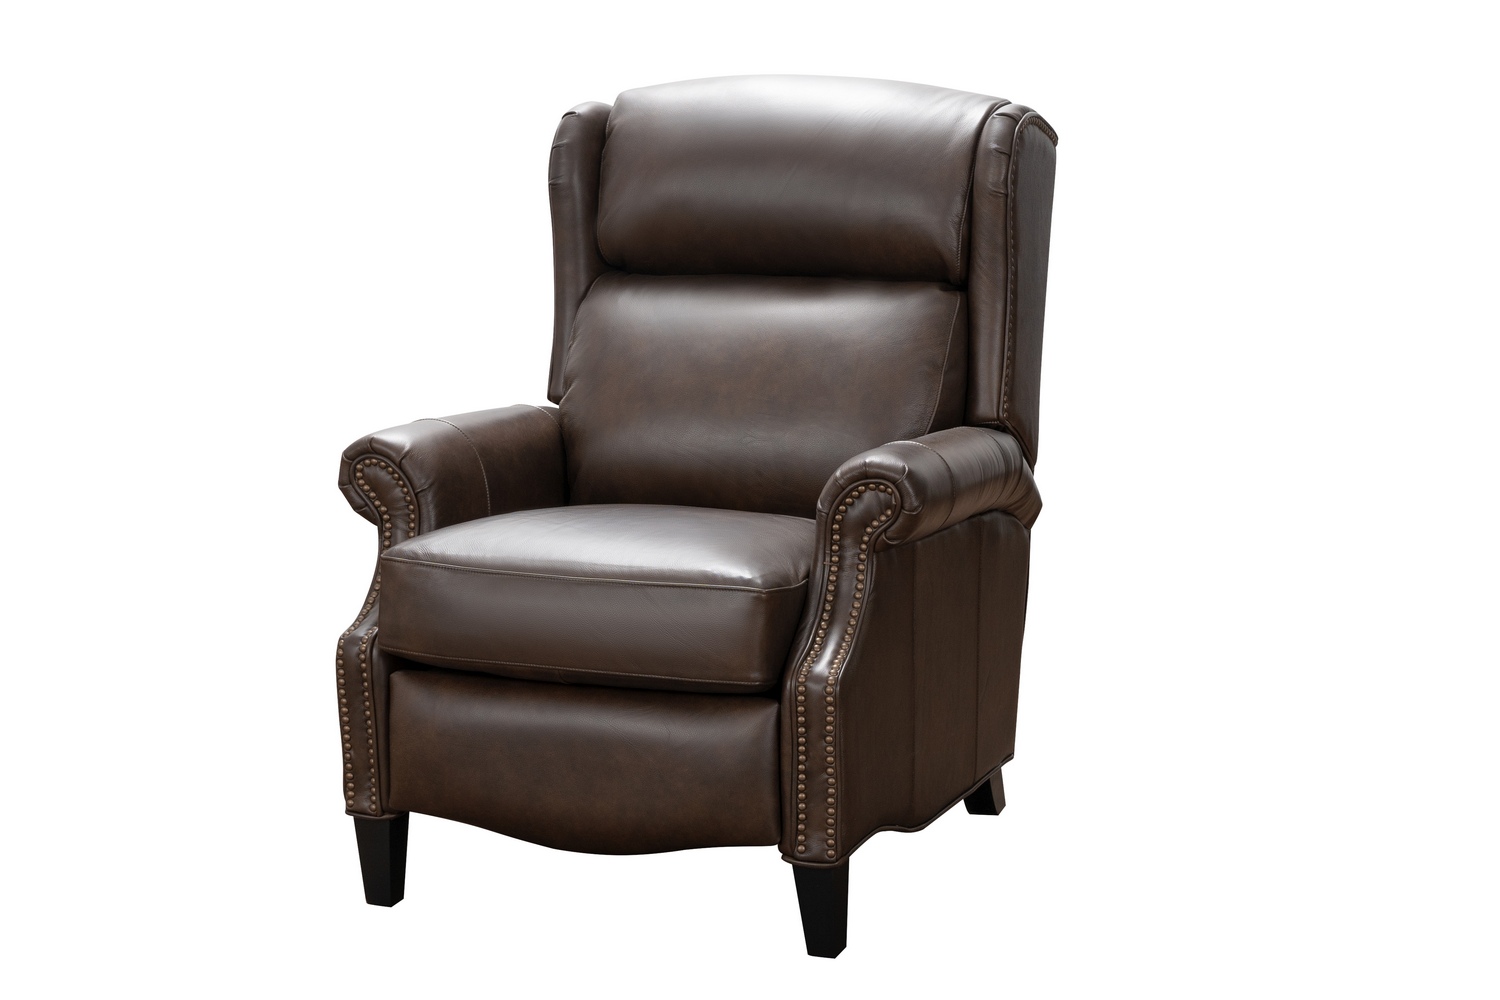 Barcalounger Philadelphia Power Recliner Chair with Power Head Rest and Lumbar - Ashford Walnut/All Leather